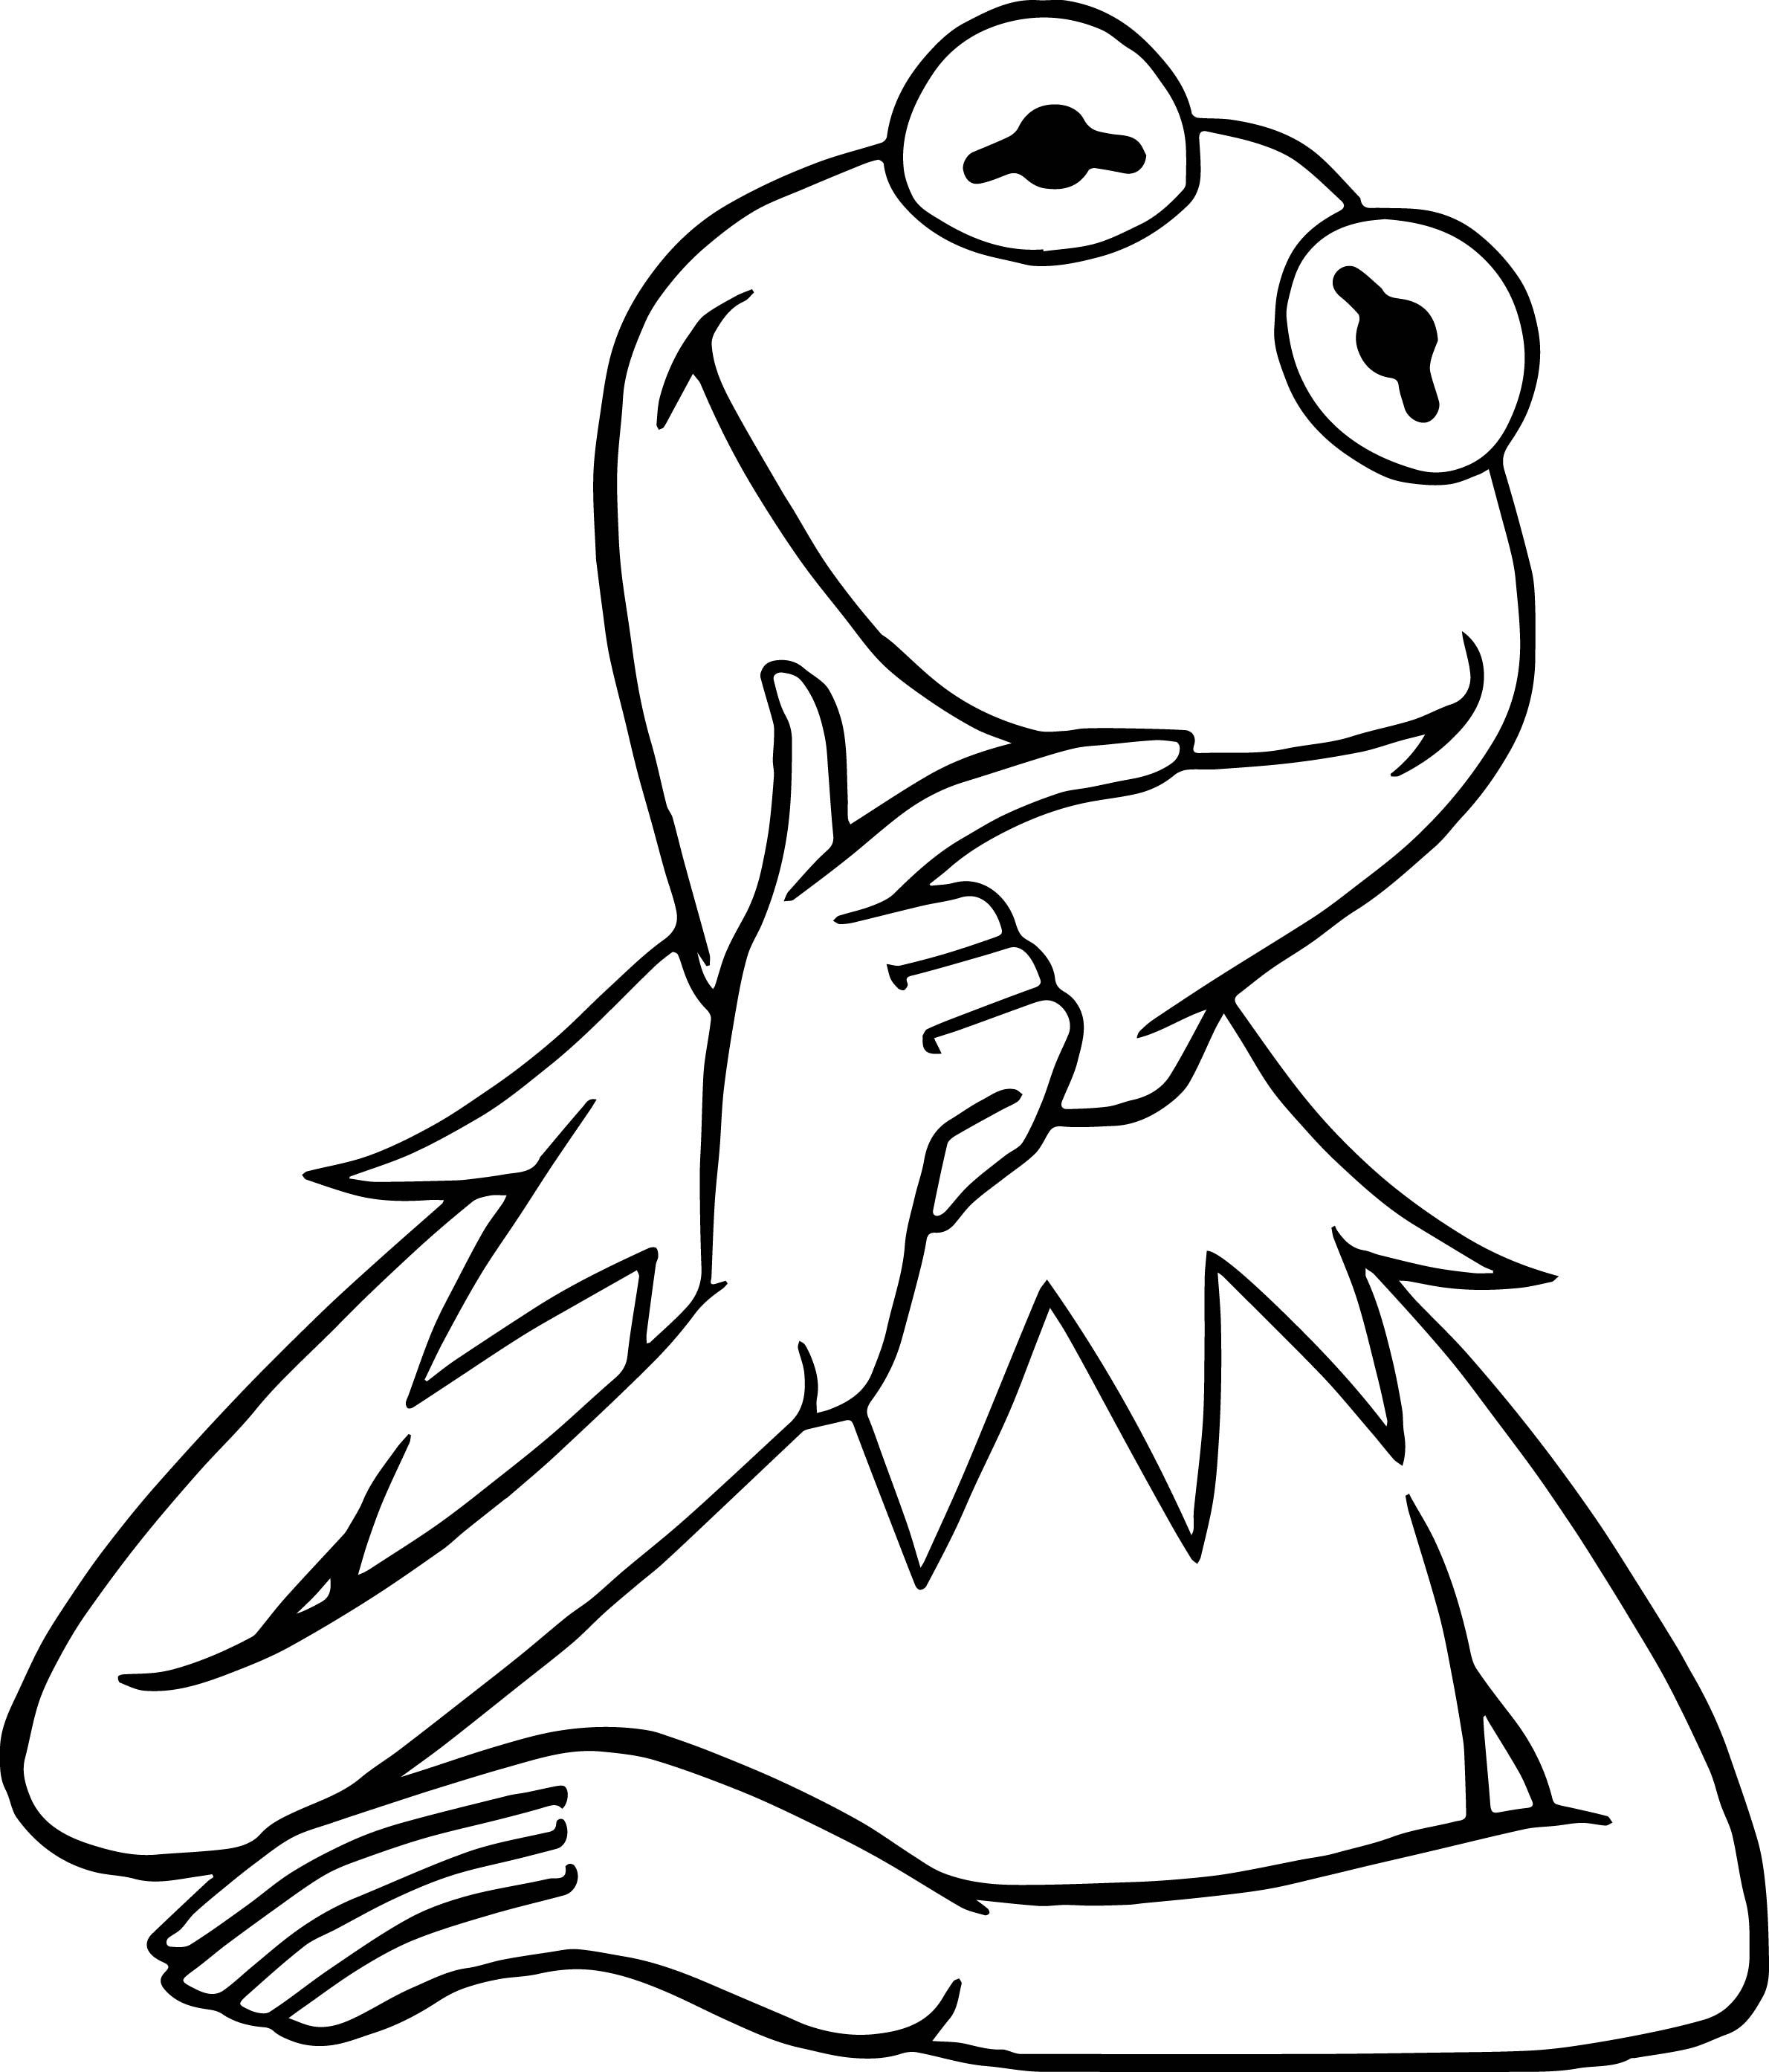 Awesome the muppets kermit the frog think coloring pages frog coloring pages coloring pages sesame street coloring pages